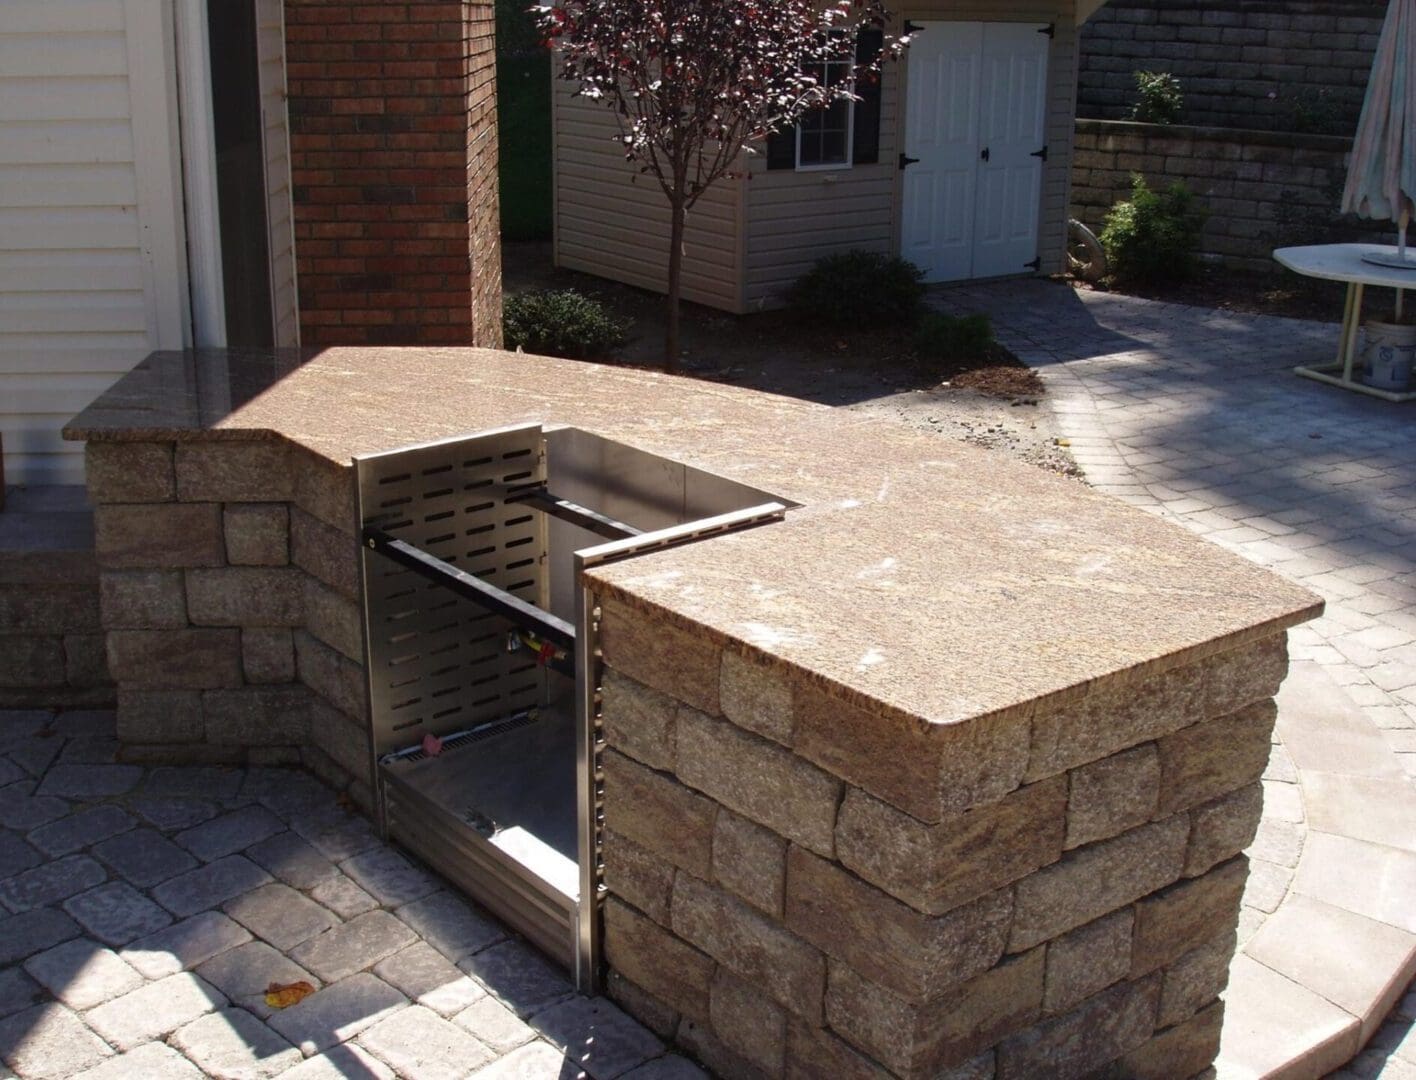 A brick bbq grill with stone walls and an outdoor kitchen.